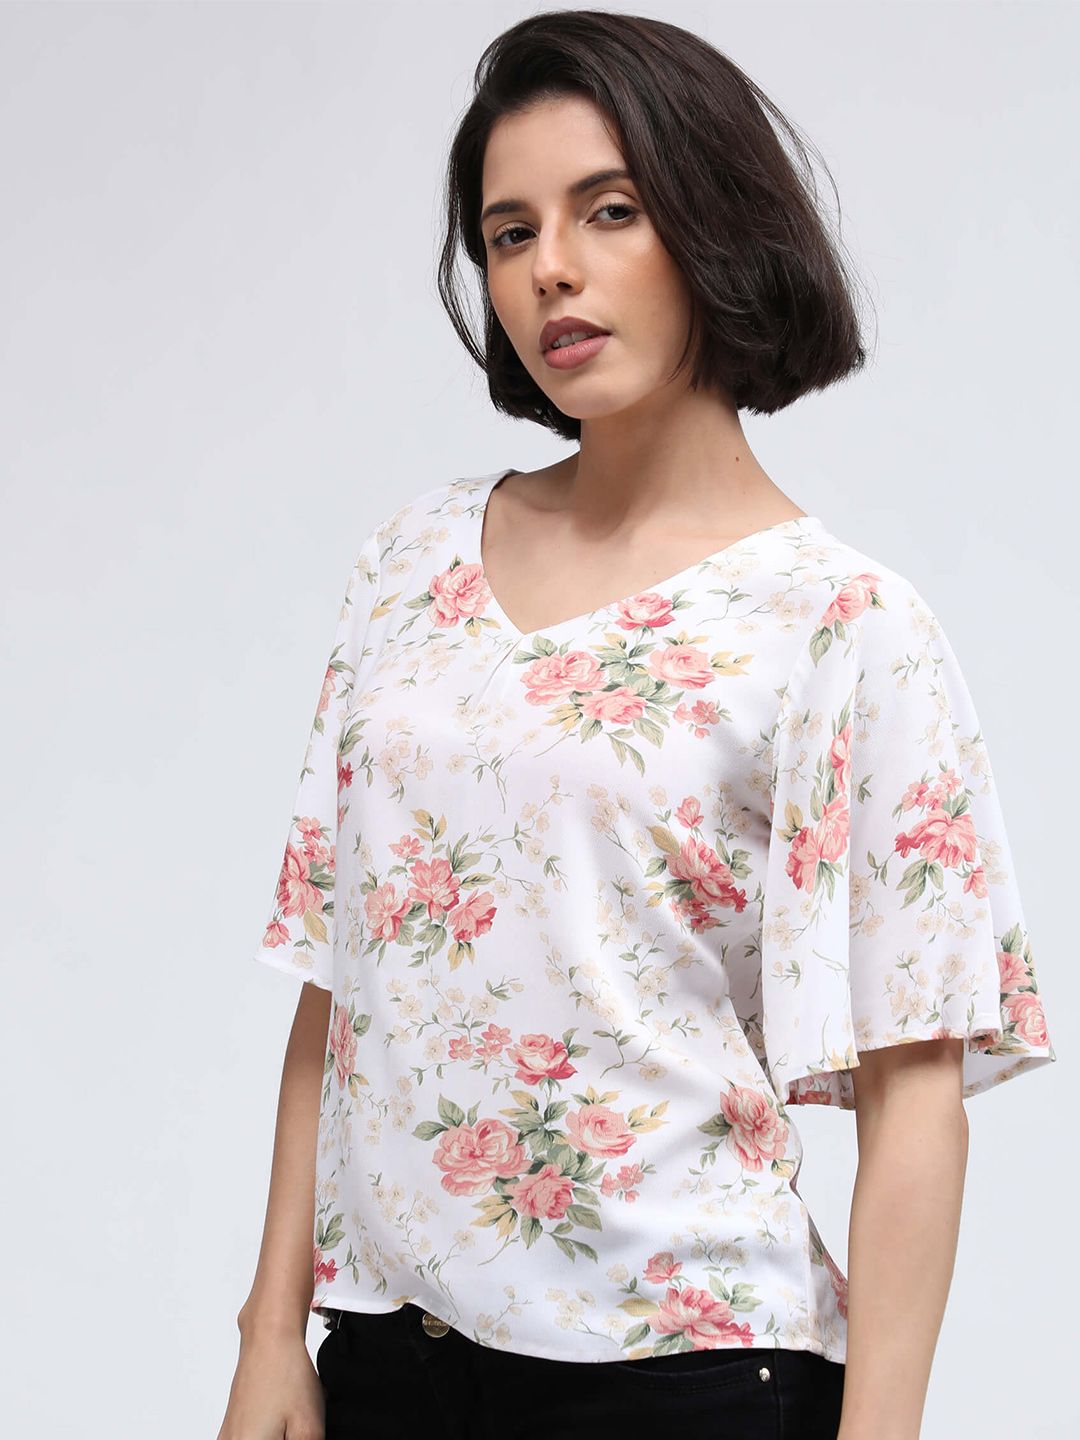 IDK White Floral Print Georgette Top Price in India